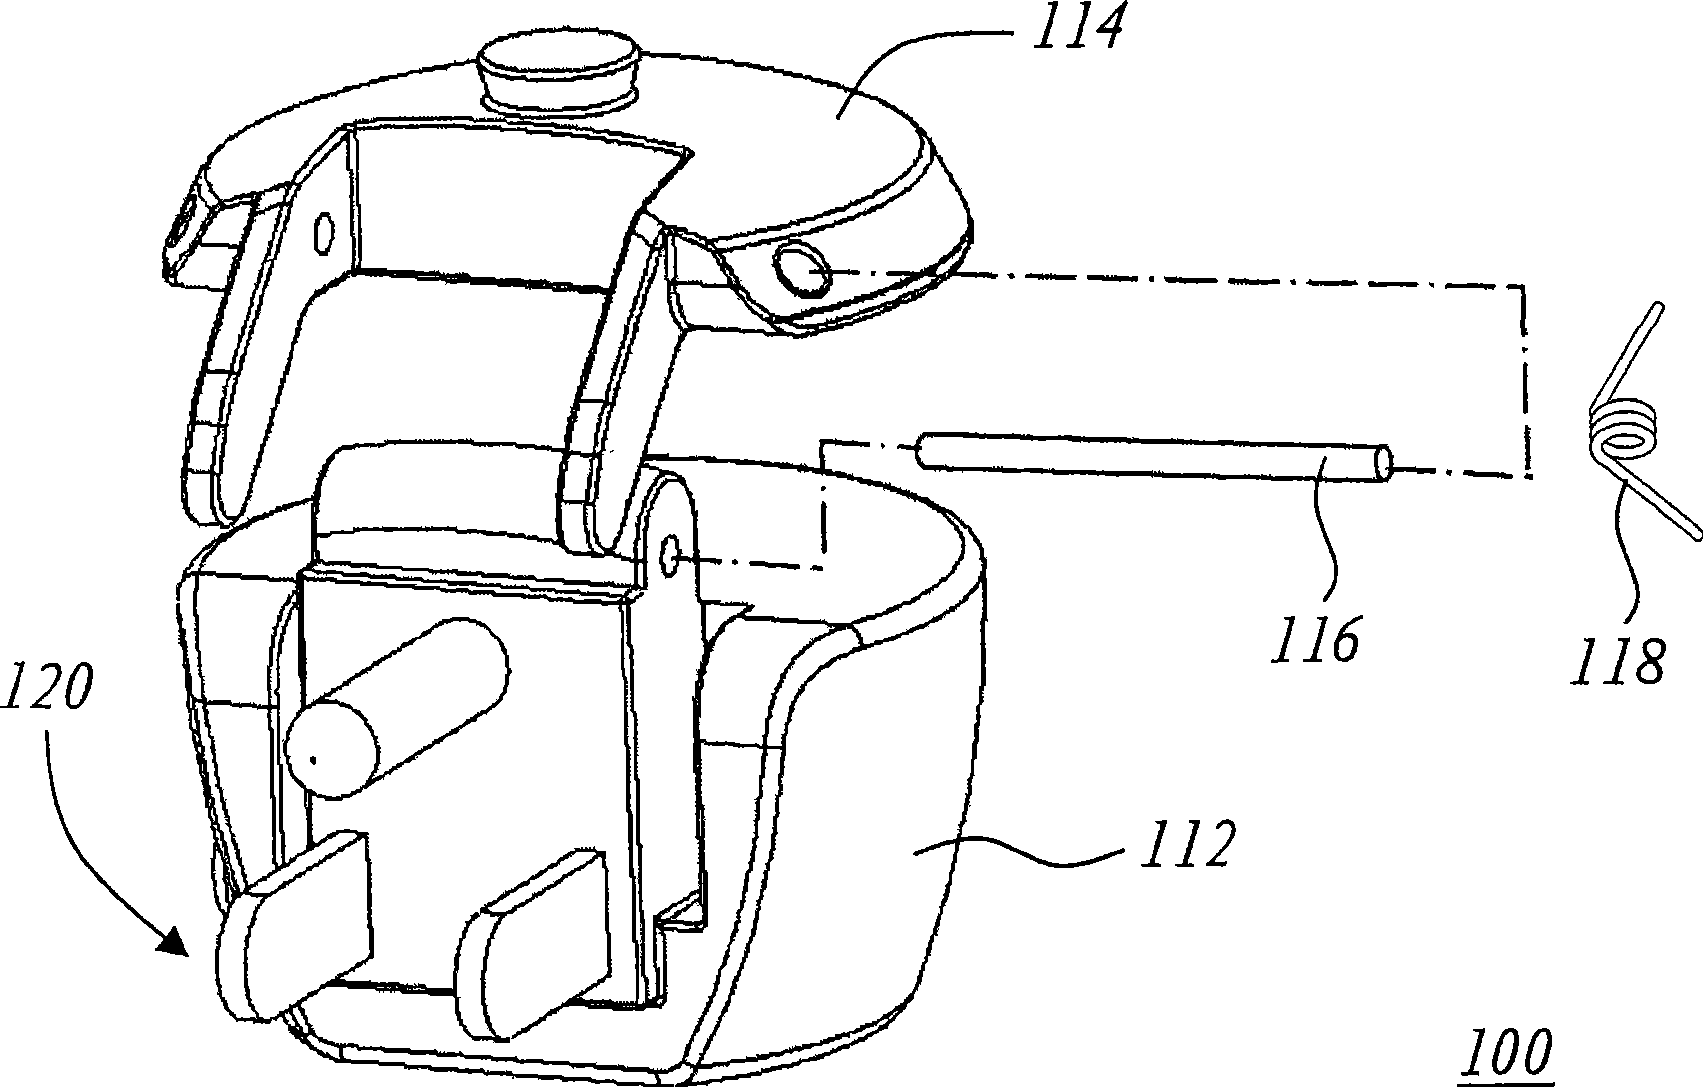 Molded plug and electric appliances applying the same